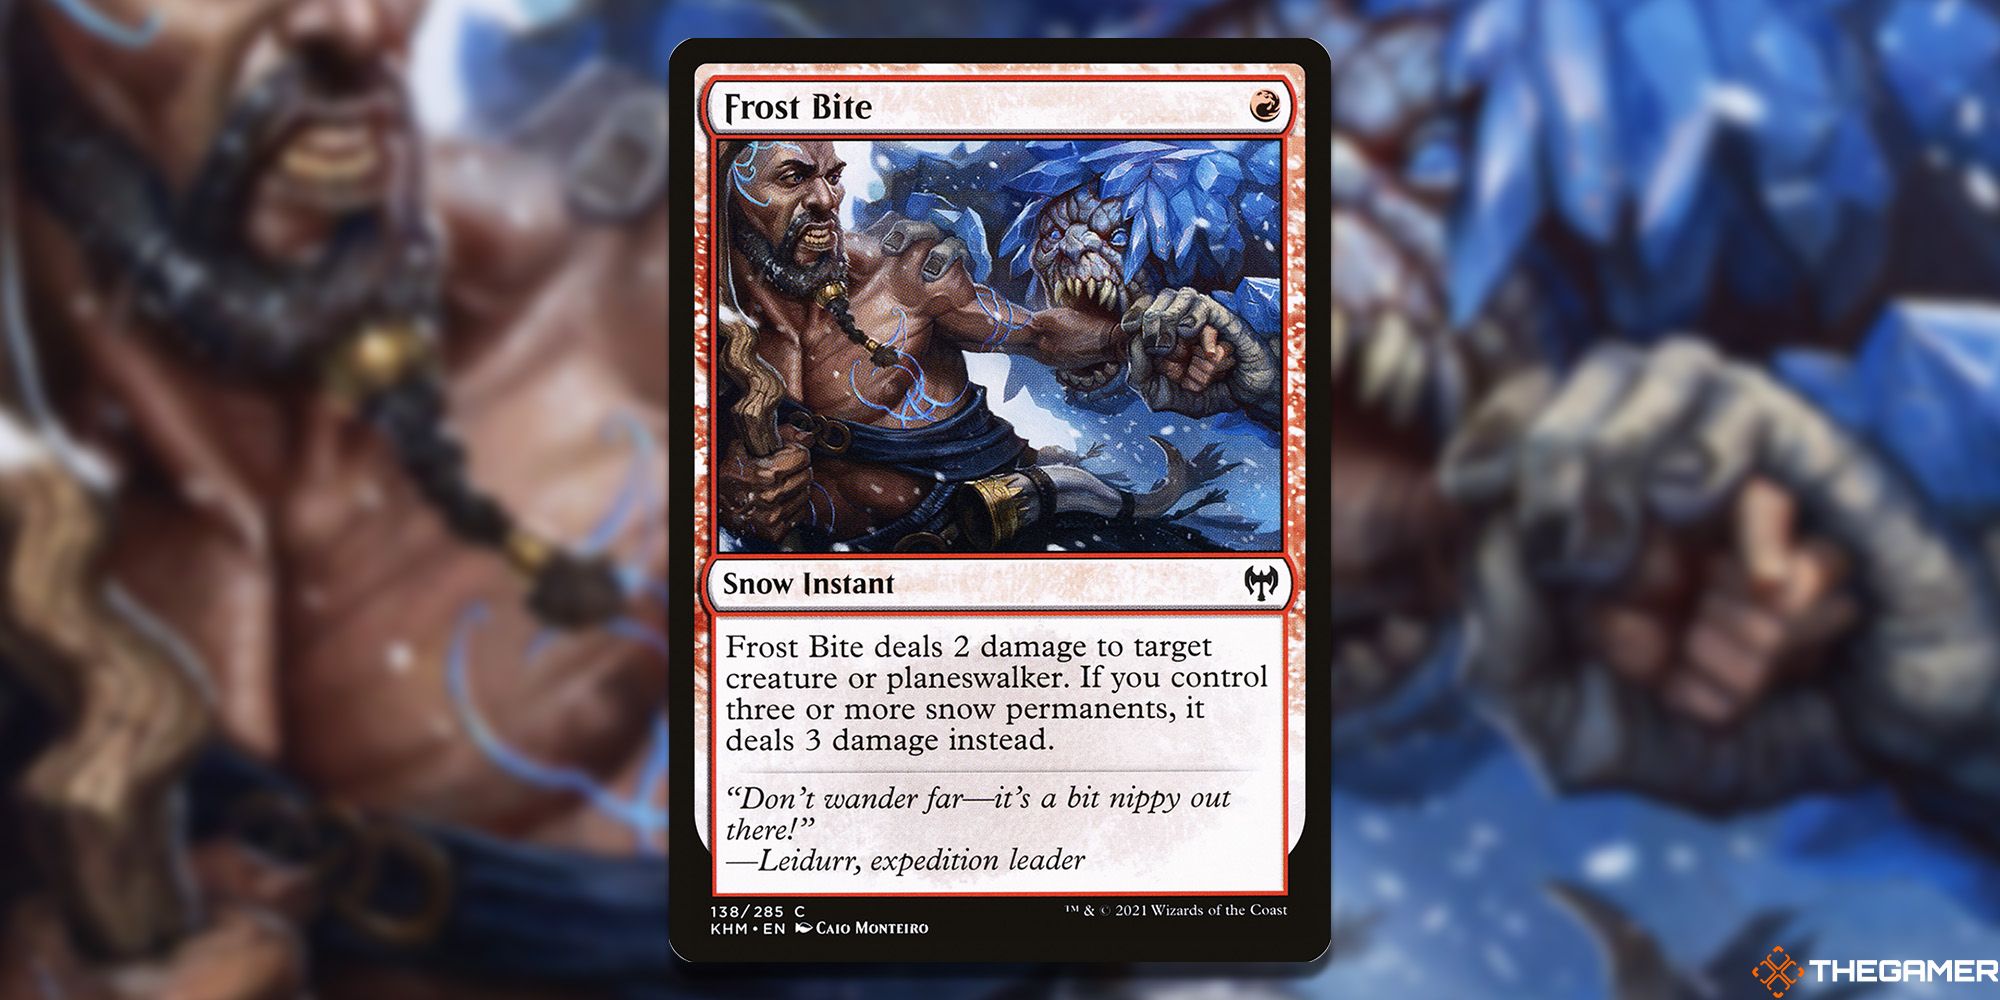 Frost Bite Magic: The Gathering Card overlaid over artwork.